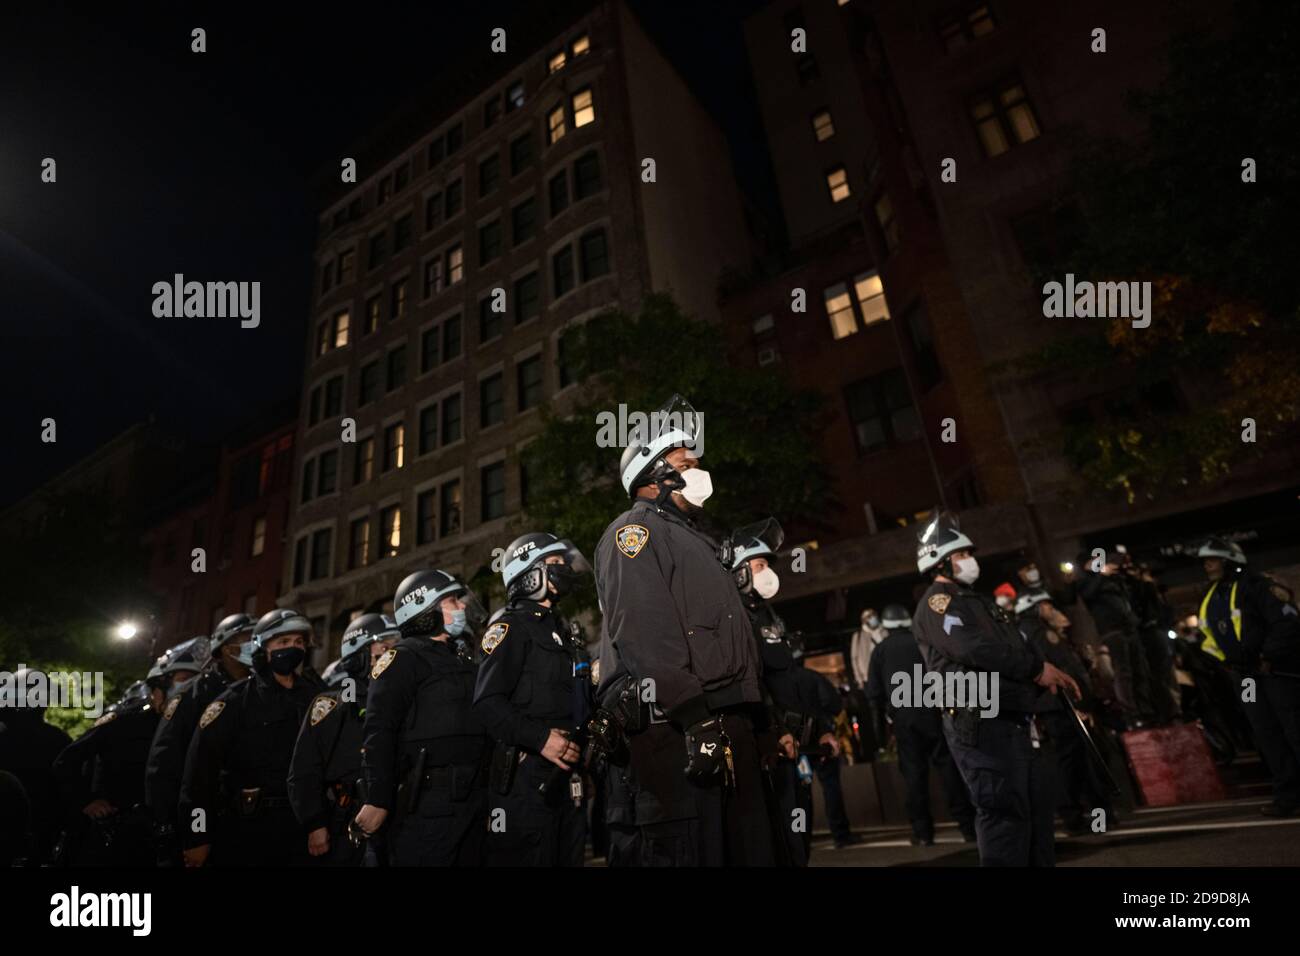 New York, New York, US. Nov 4th 2020. As the US awaits election results, New York City police officers line up for crowd control duty while several hundred anti-Trump protesters march through New York City's Greenwich Village neighborhood Stock Photo